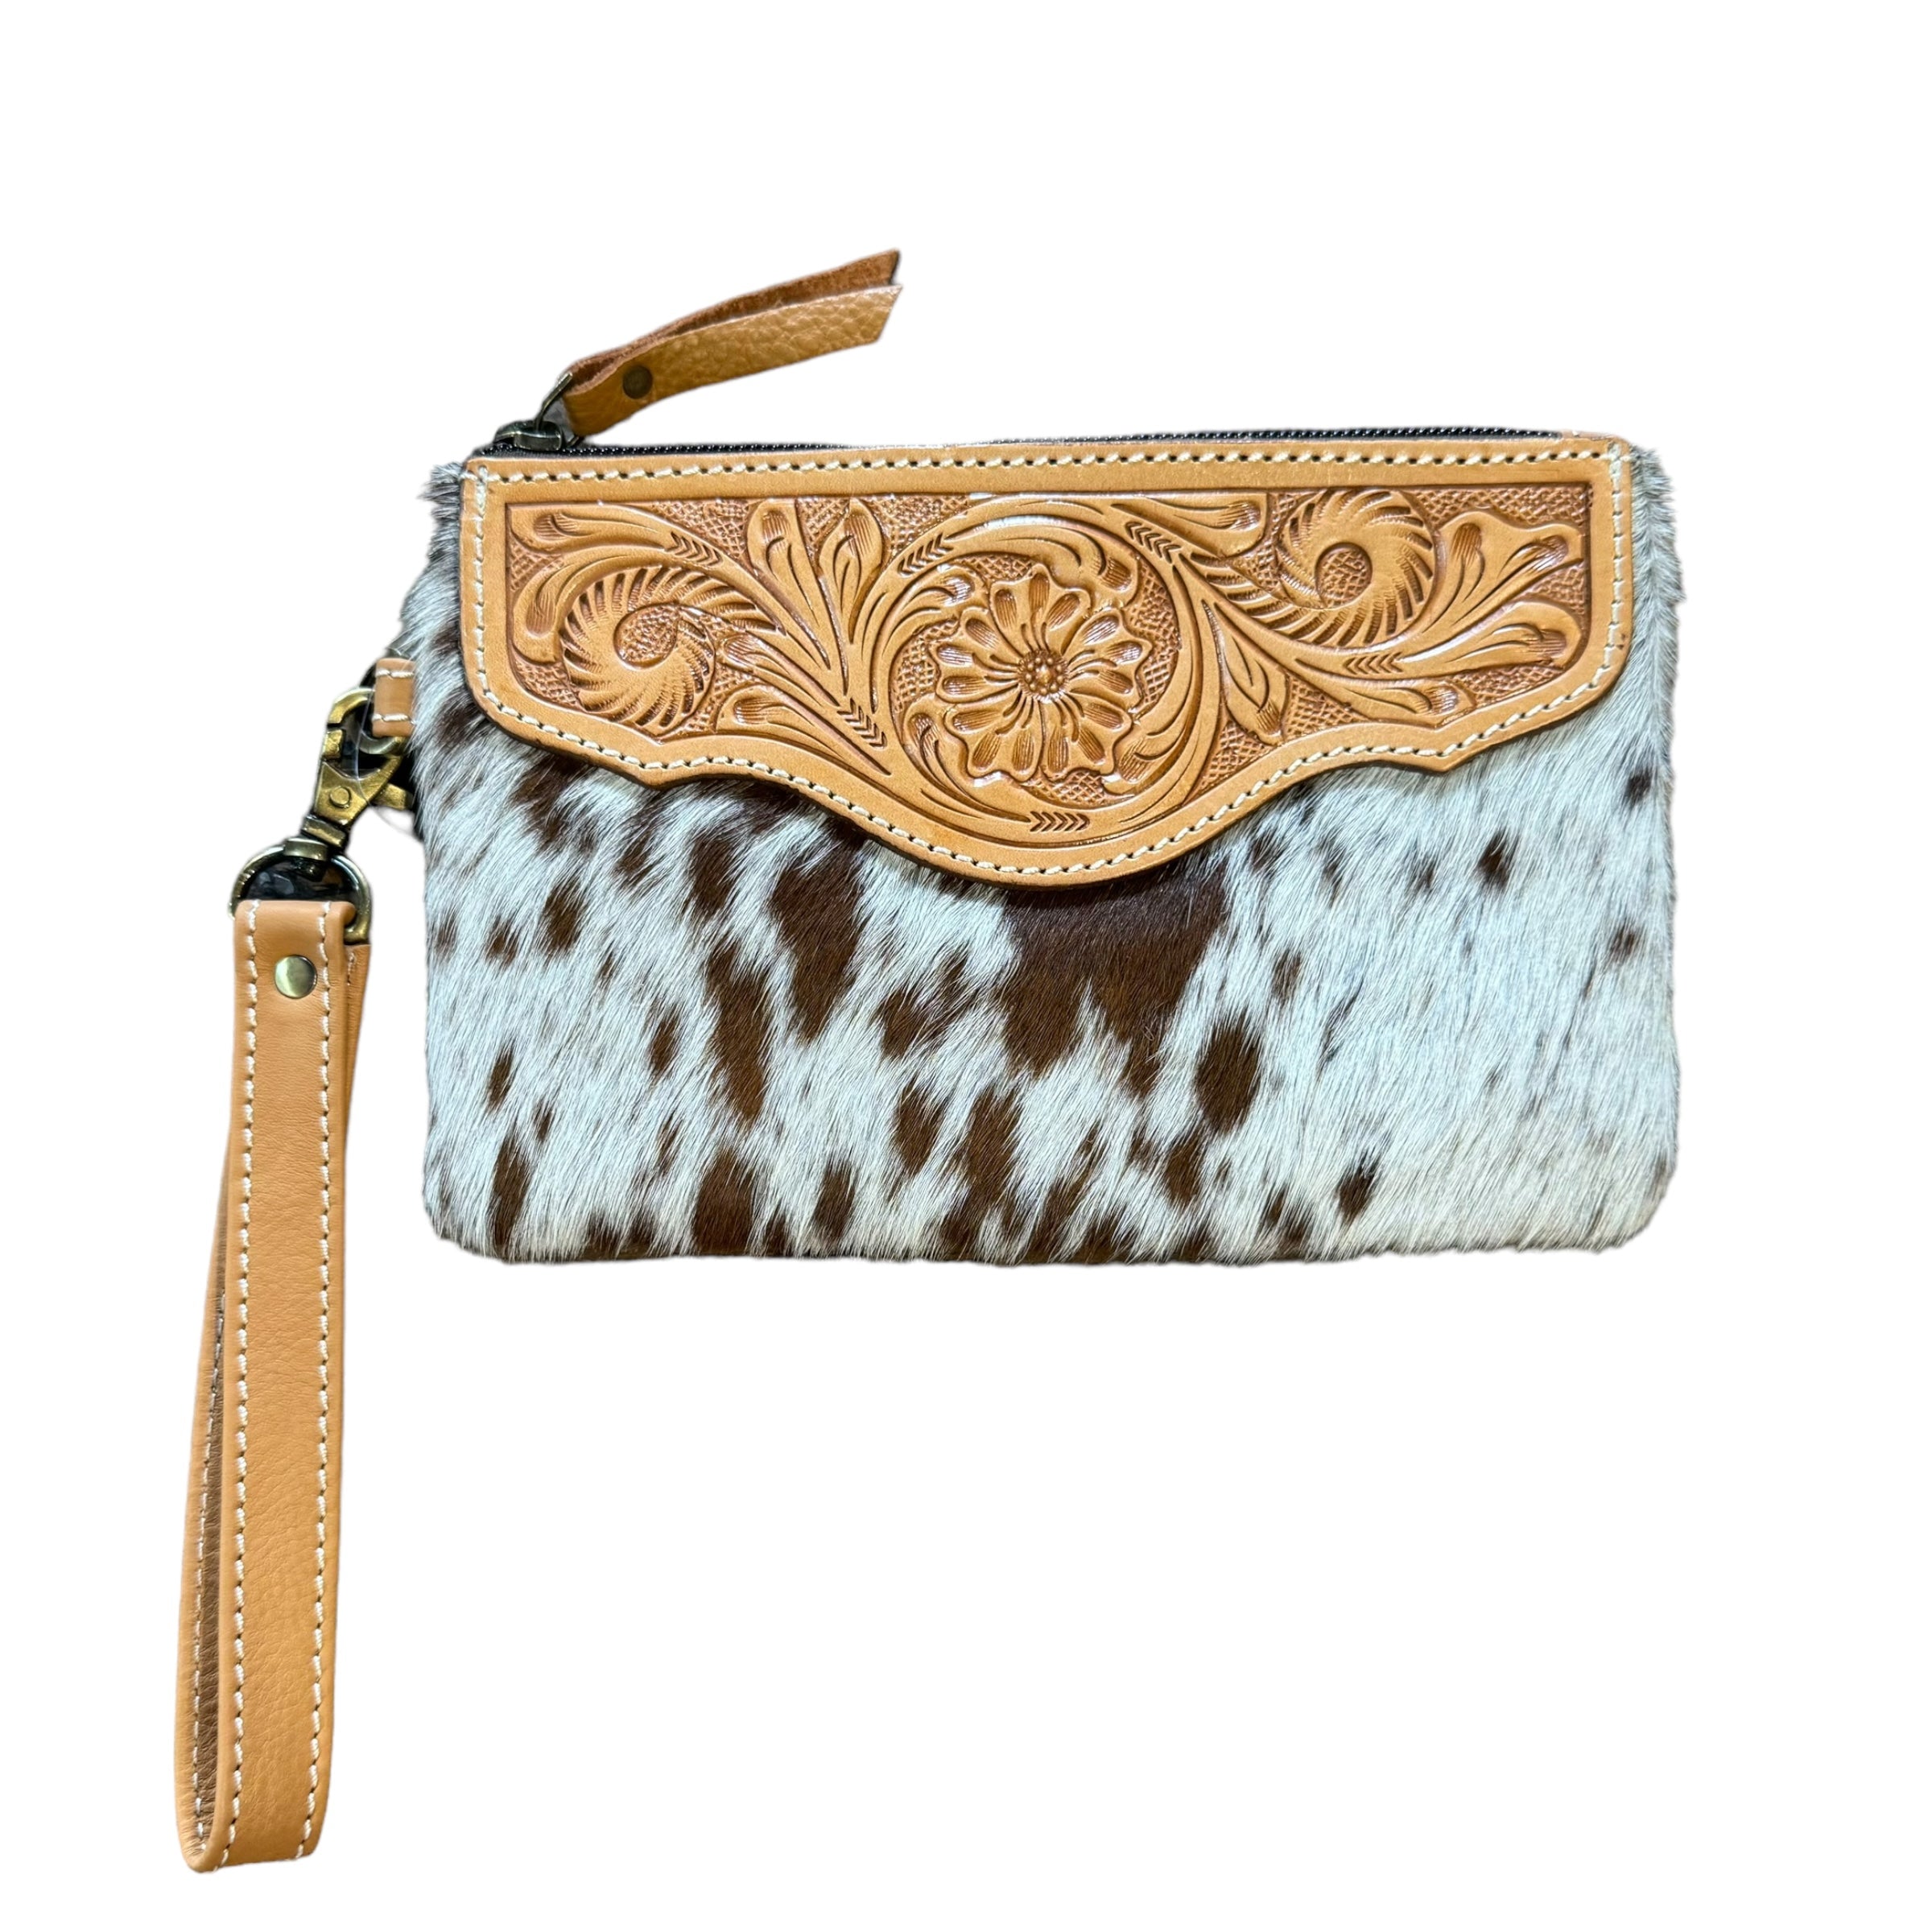 ‘Delungra' Tooled Leather Cowhide Clutch - Tan